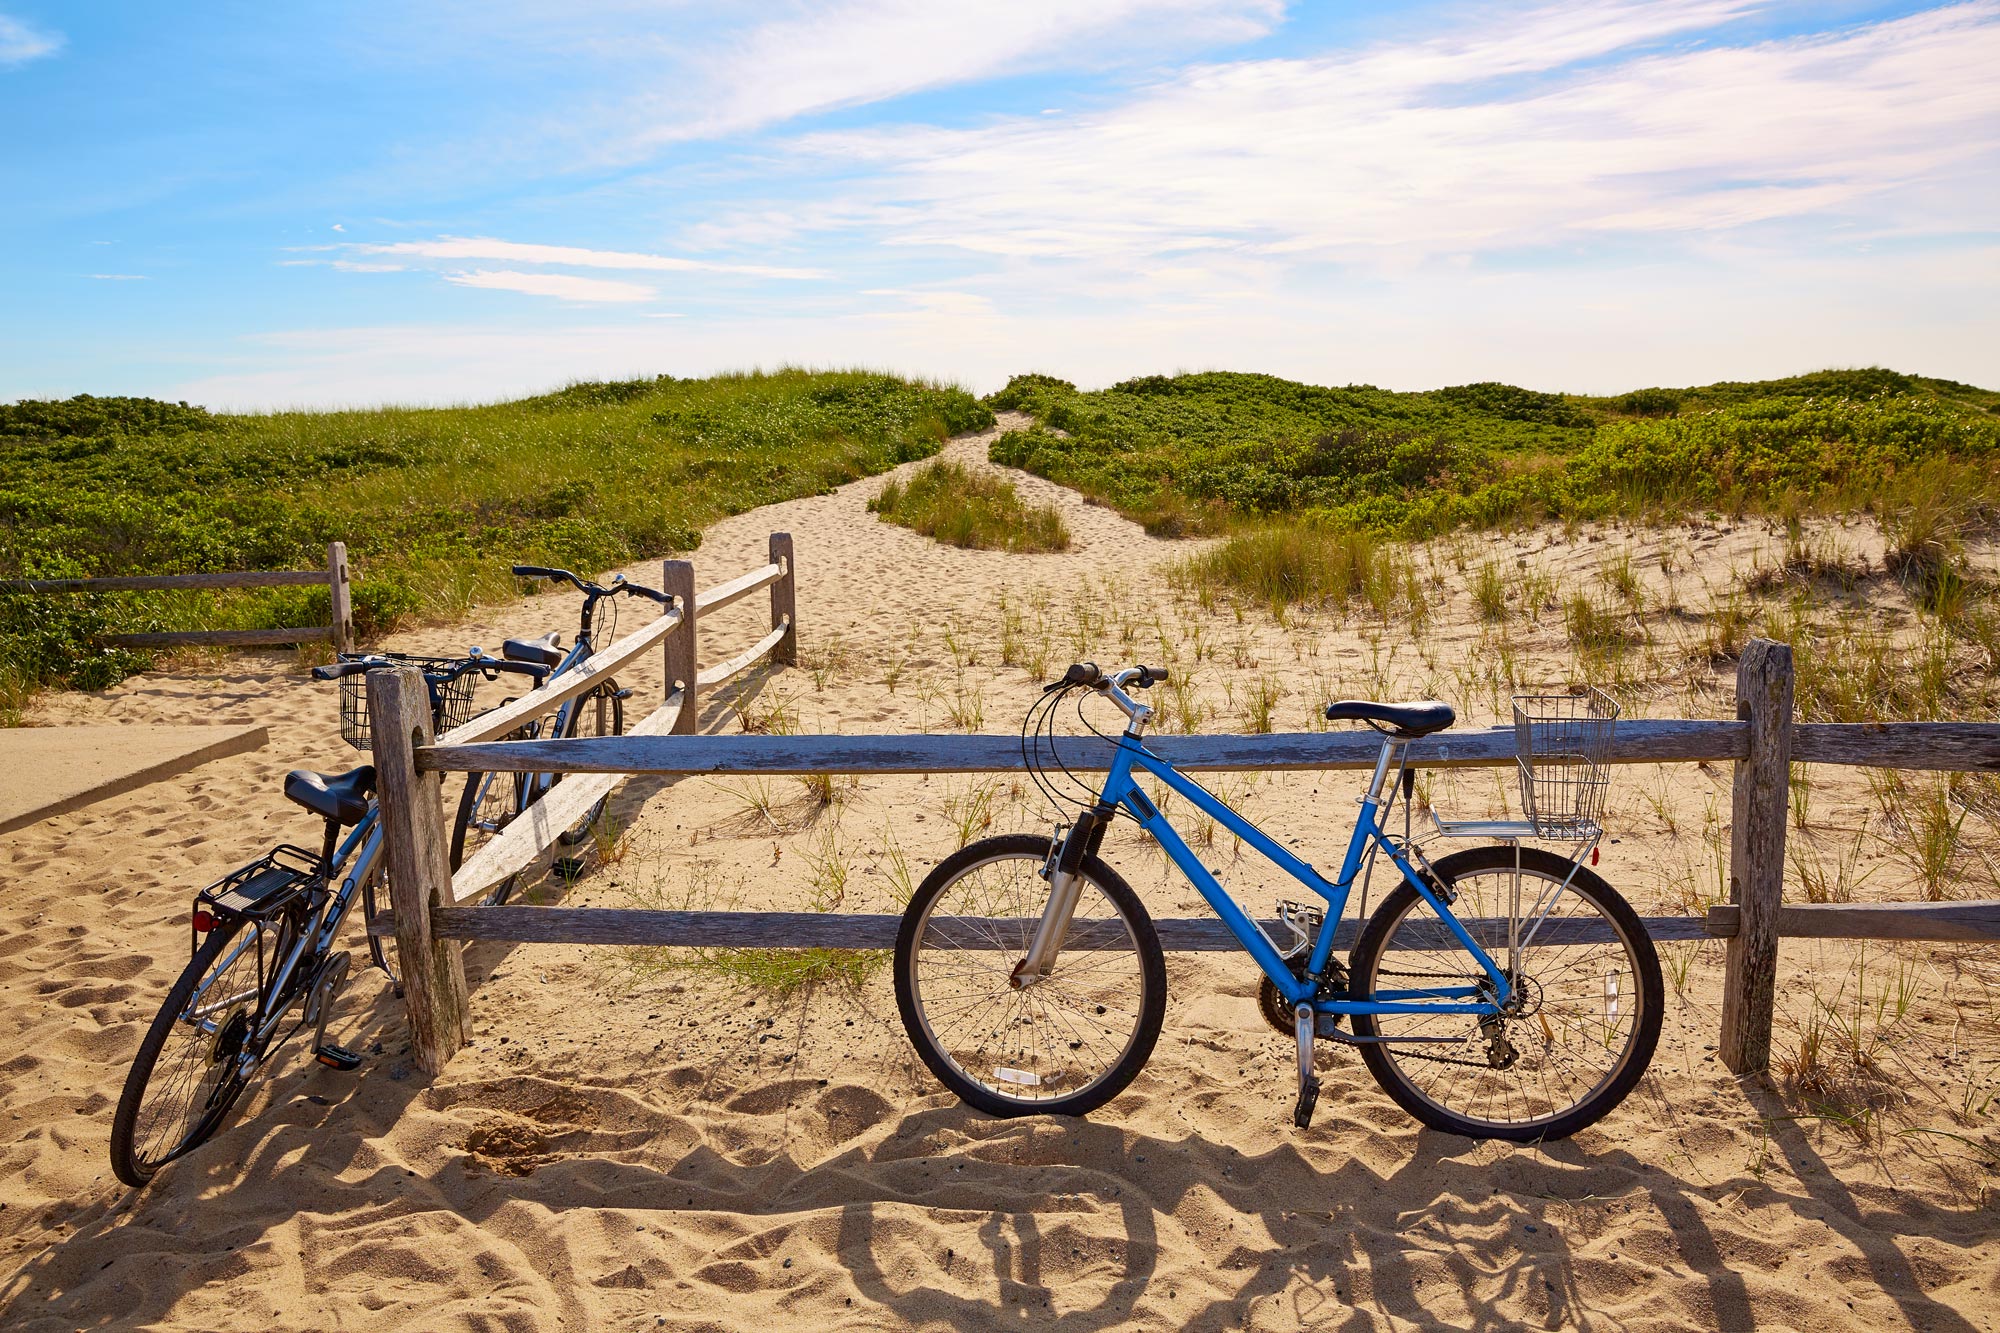 Two bikes leaning on a fence by the seashore